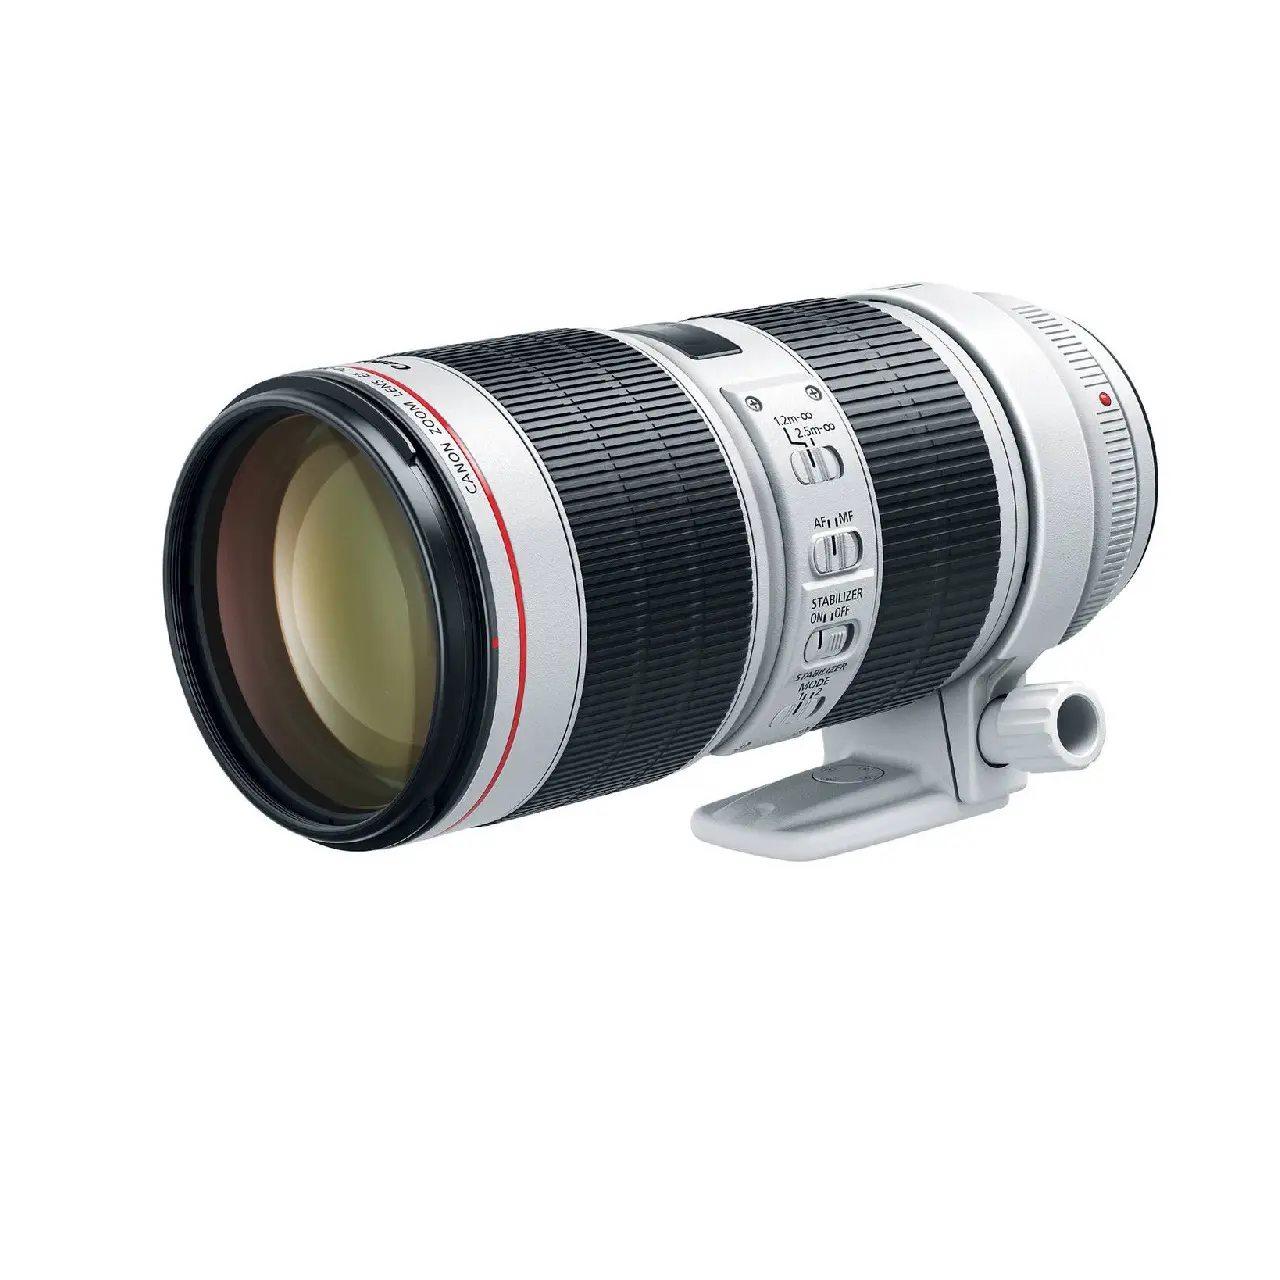 Top Best Quality Automatic Zoom Lens 5 Blades Cano'n EF 70-200mm f/2.8L IS III USM Lens Made From Singapore